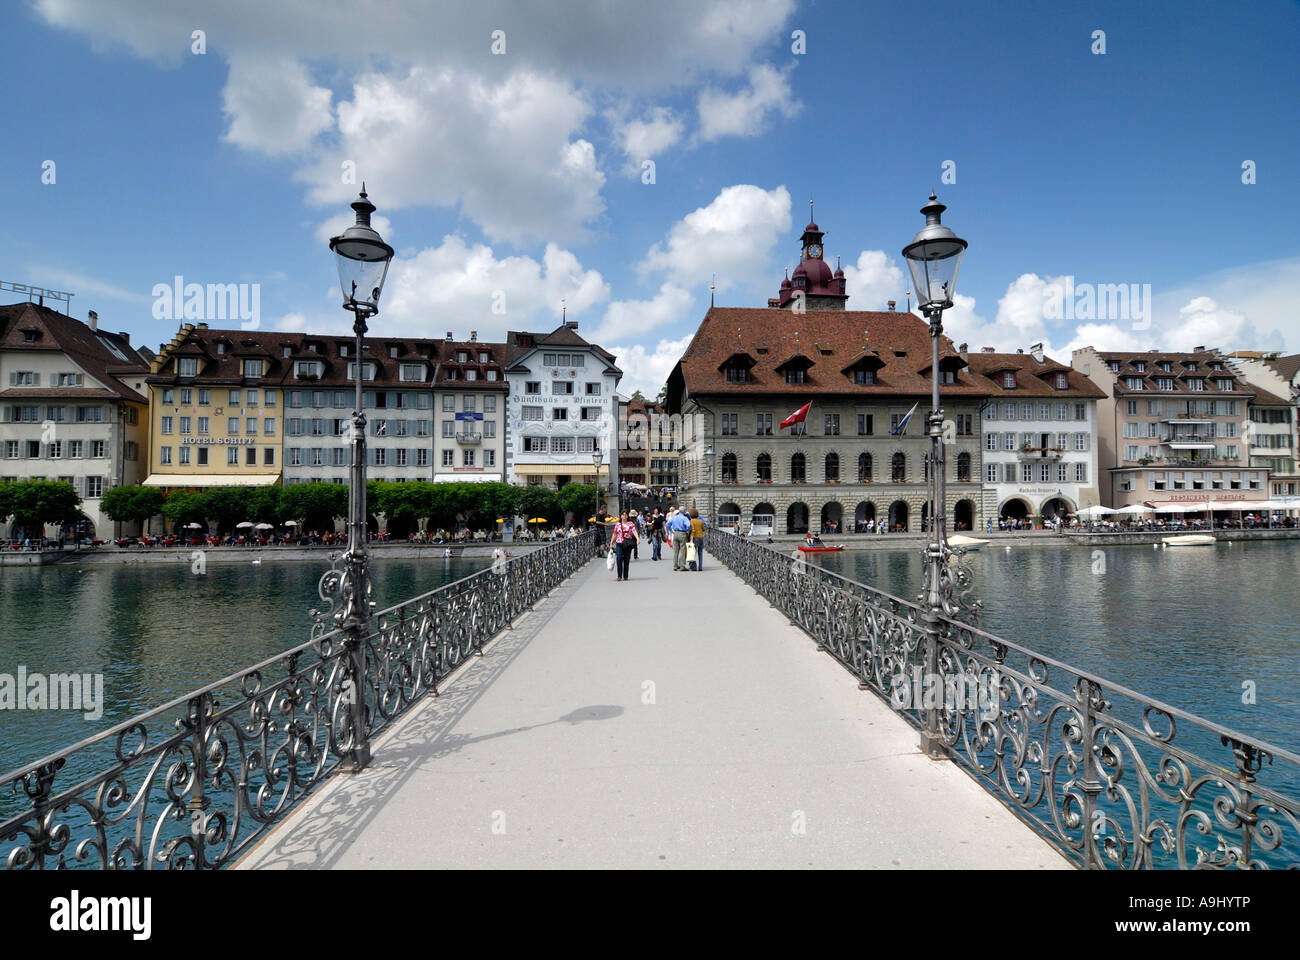 Lucerne - the city hall bridge and old part of town - Switzerland, Europe. Stock Photo